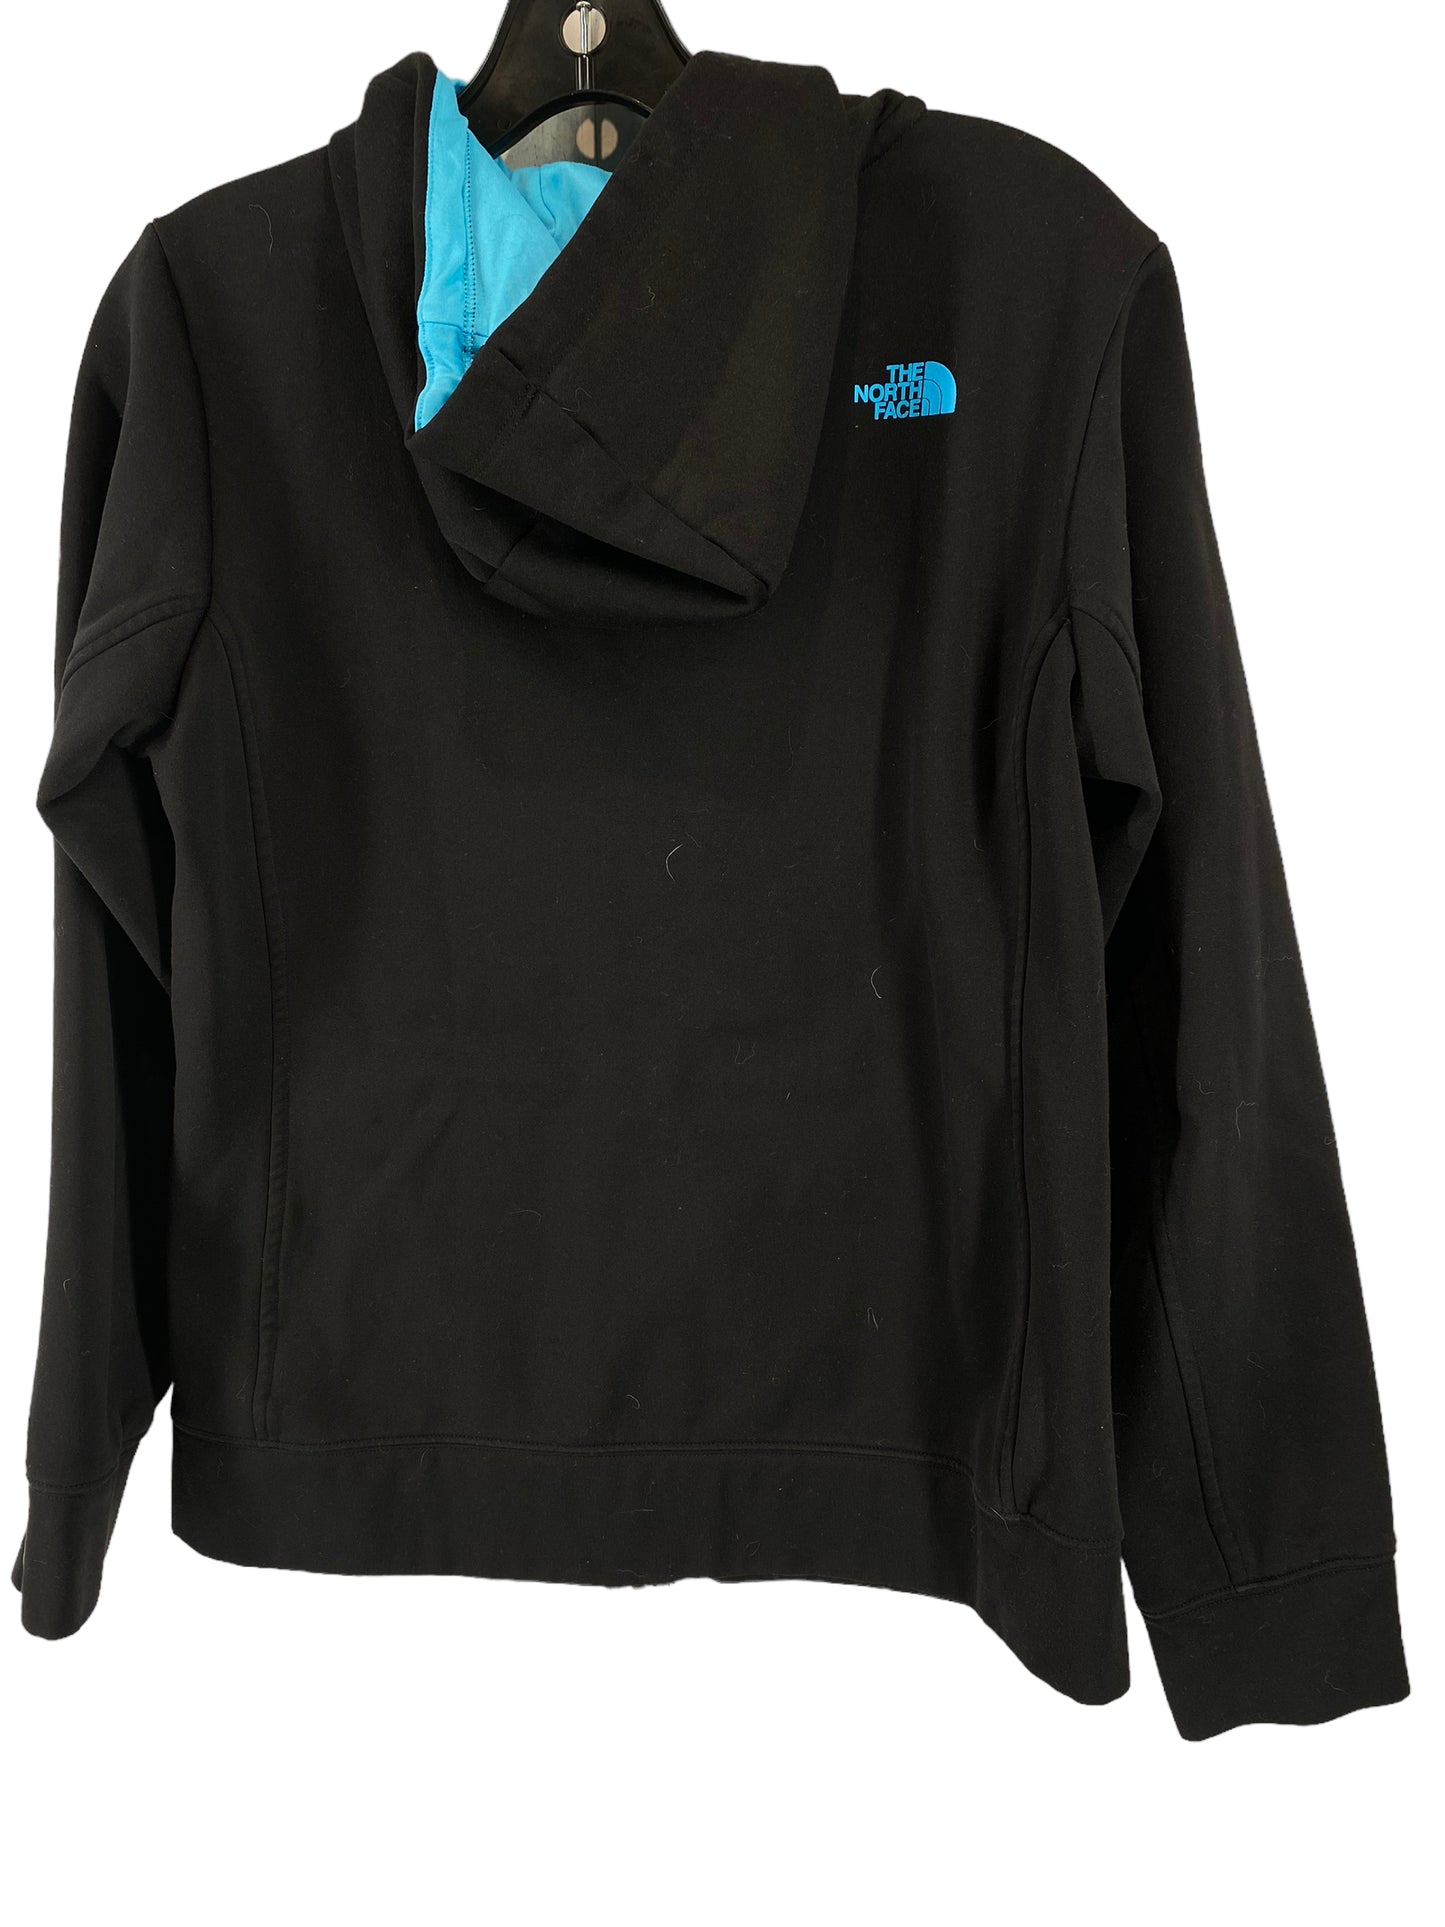 Athletic Jacket By North Face  Size: M